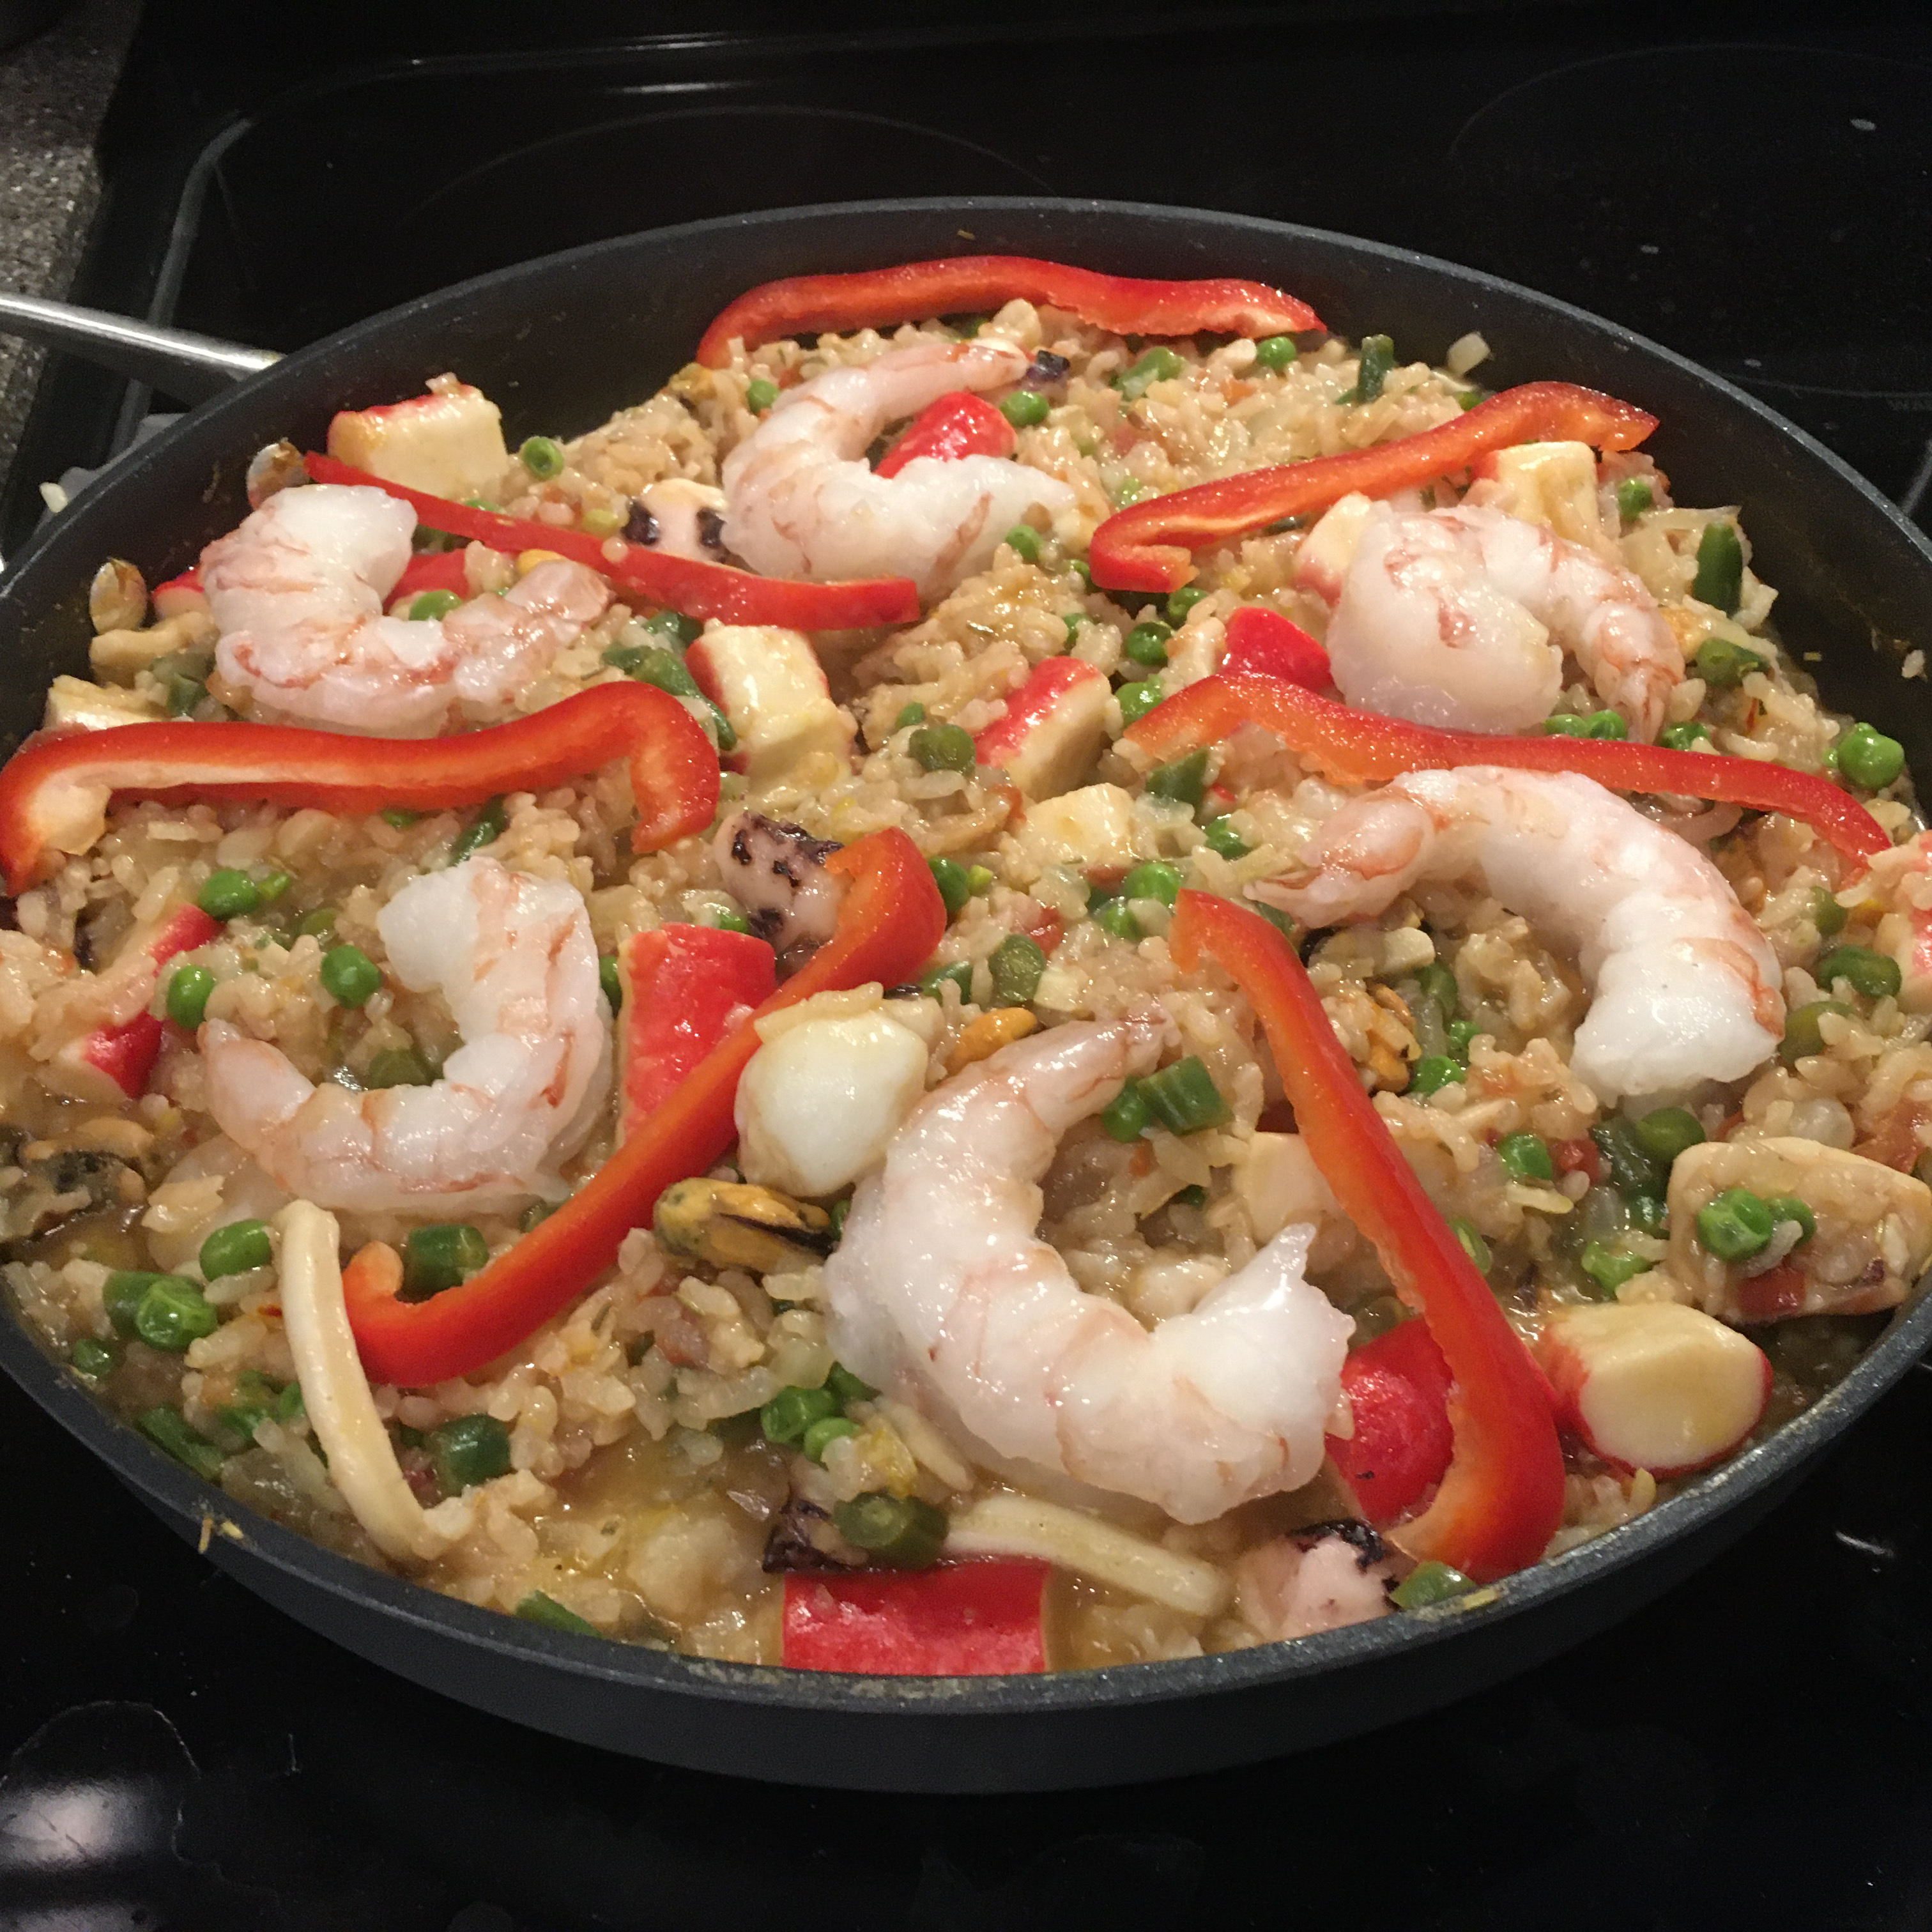 Authentic Seafood Paella 